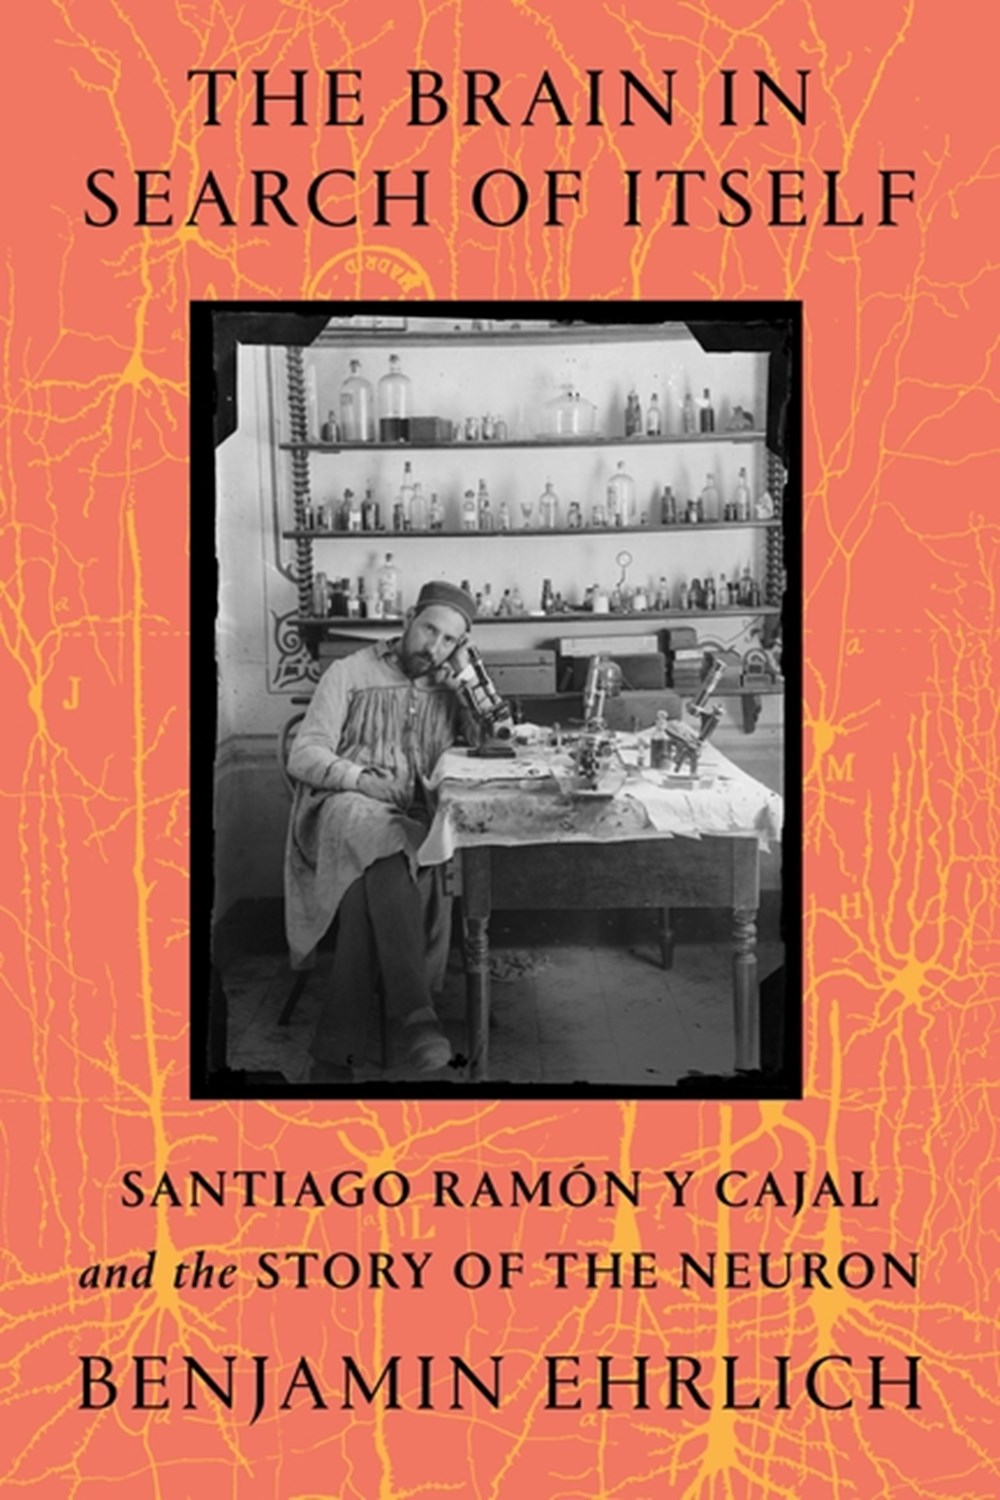 Brain in Search of Itself: Santiago Ramón Y Cajal and the Story of the Neuron